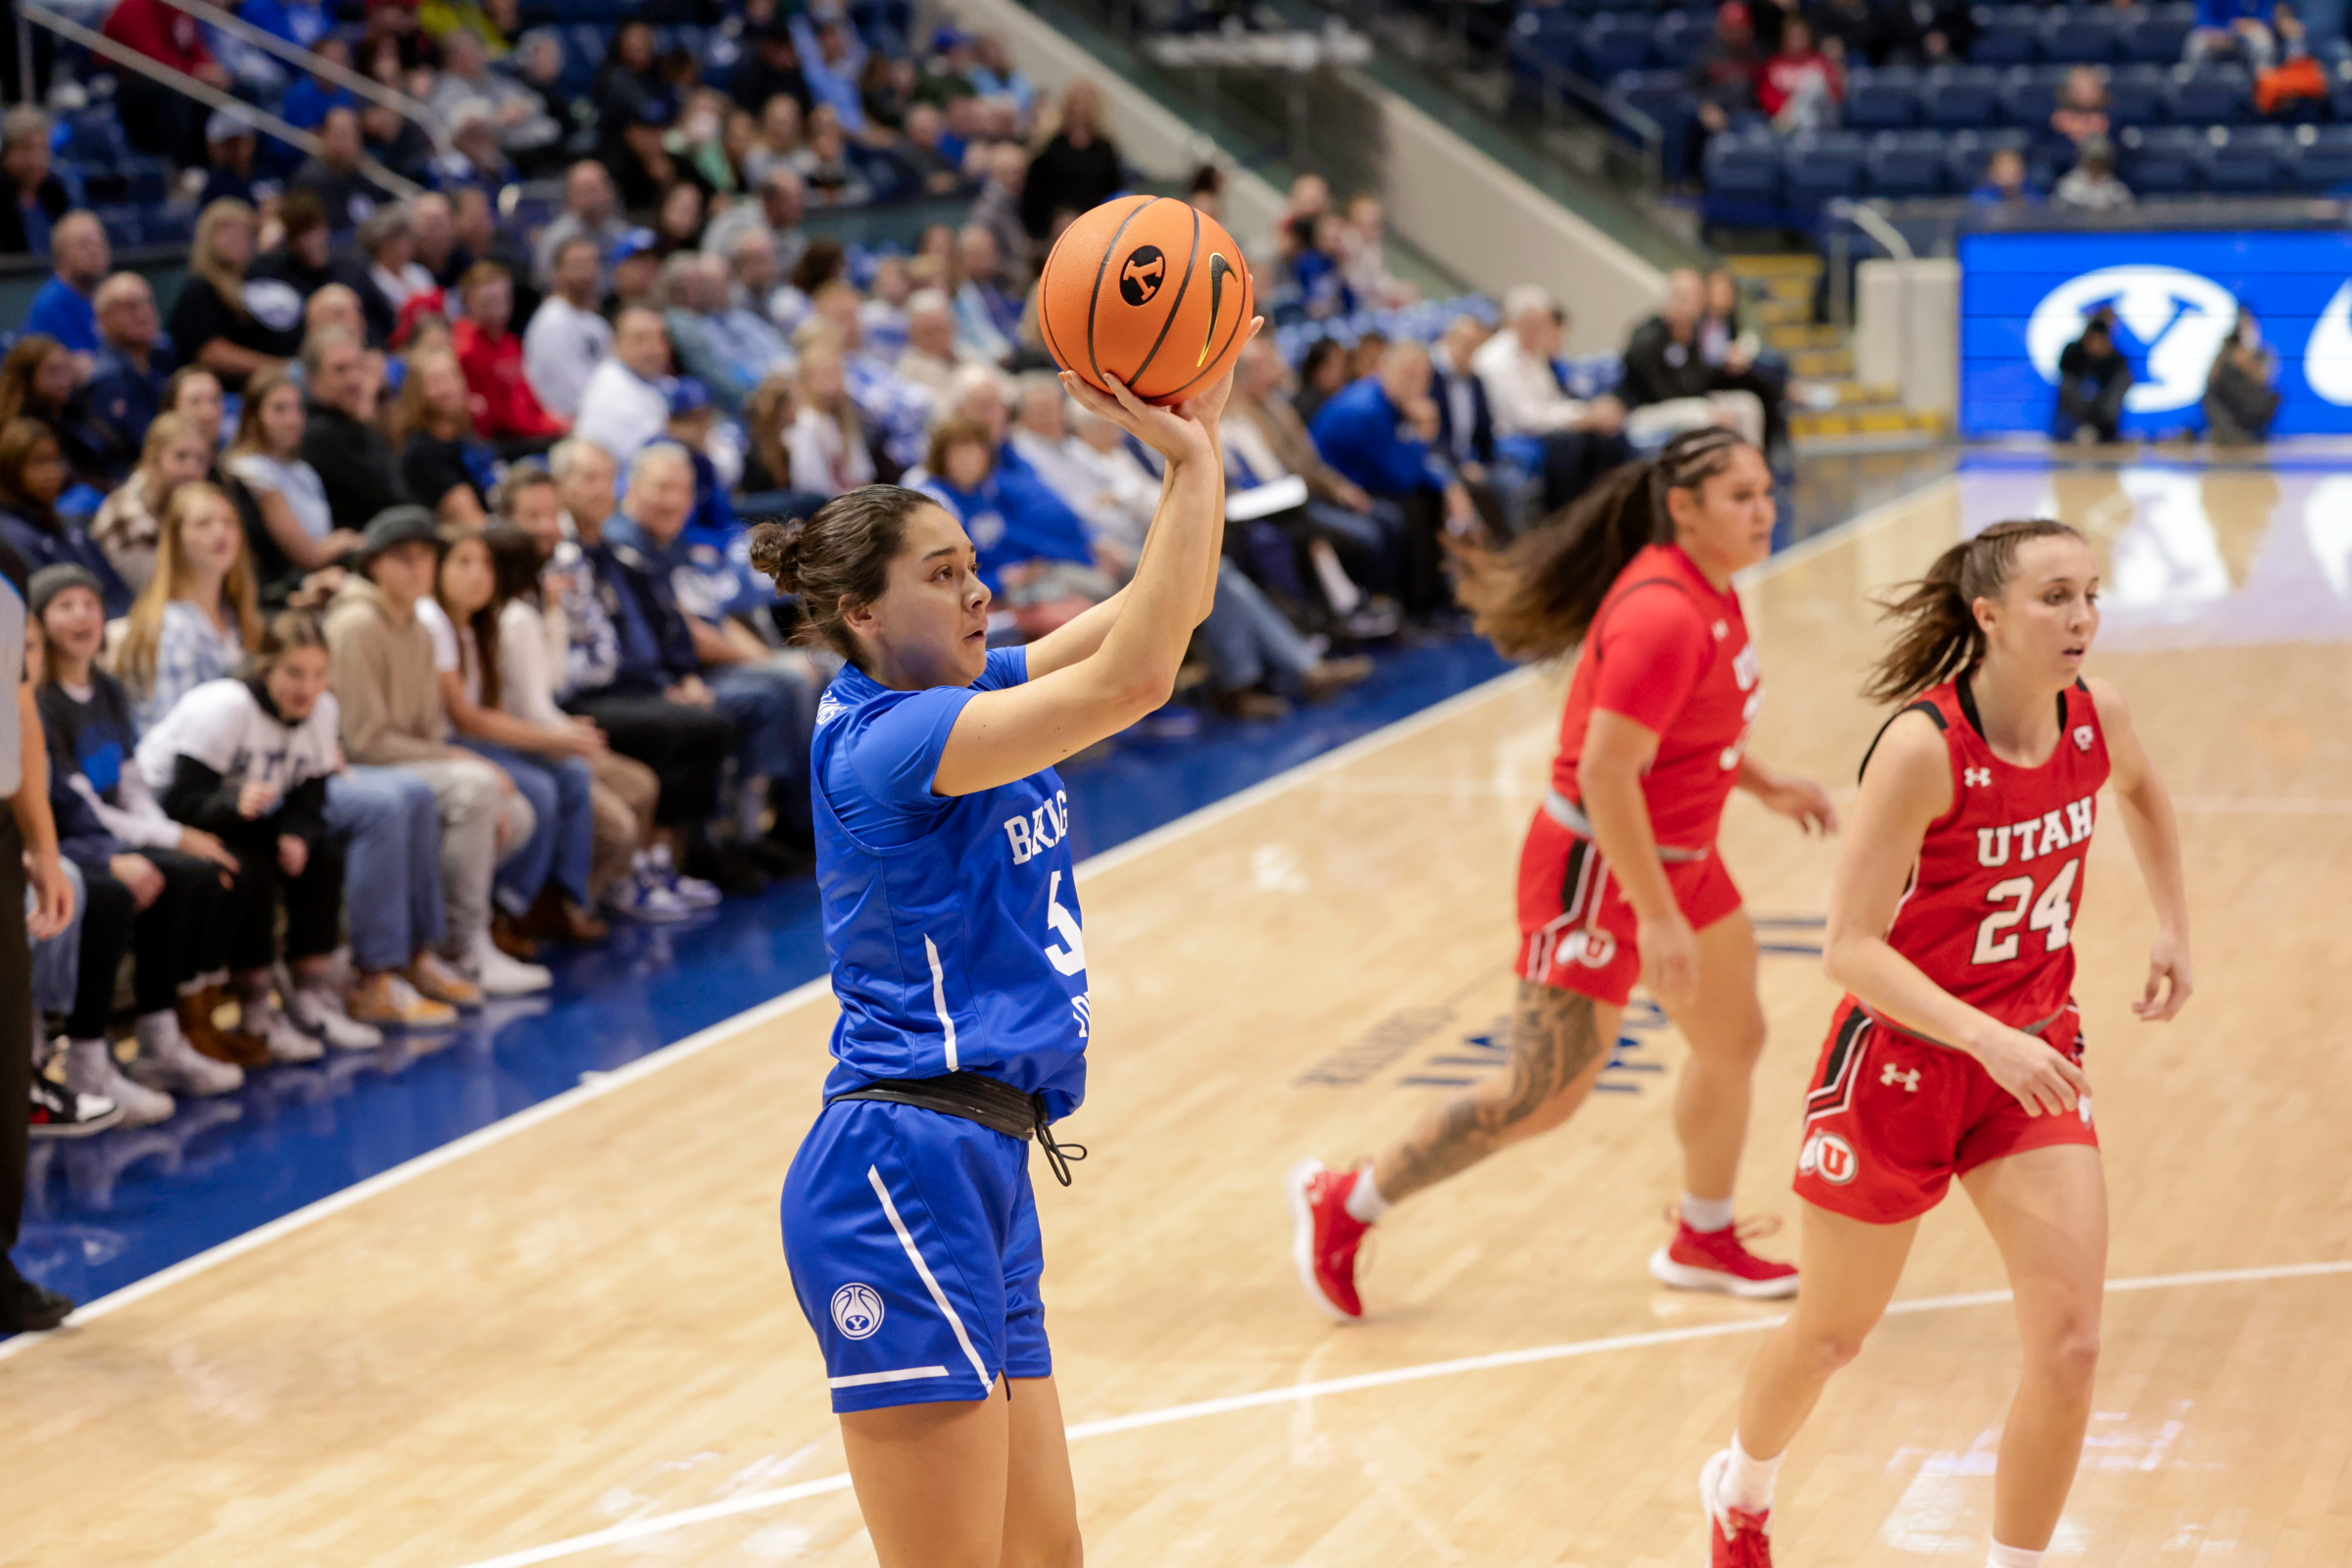 Arielle Mackey-Williams puts up a shot during a game against Utah on December 10, 2022.